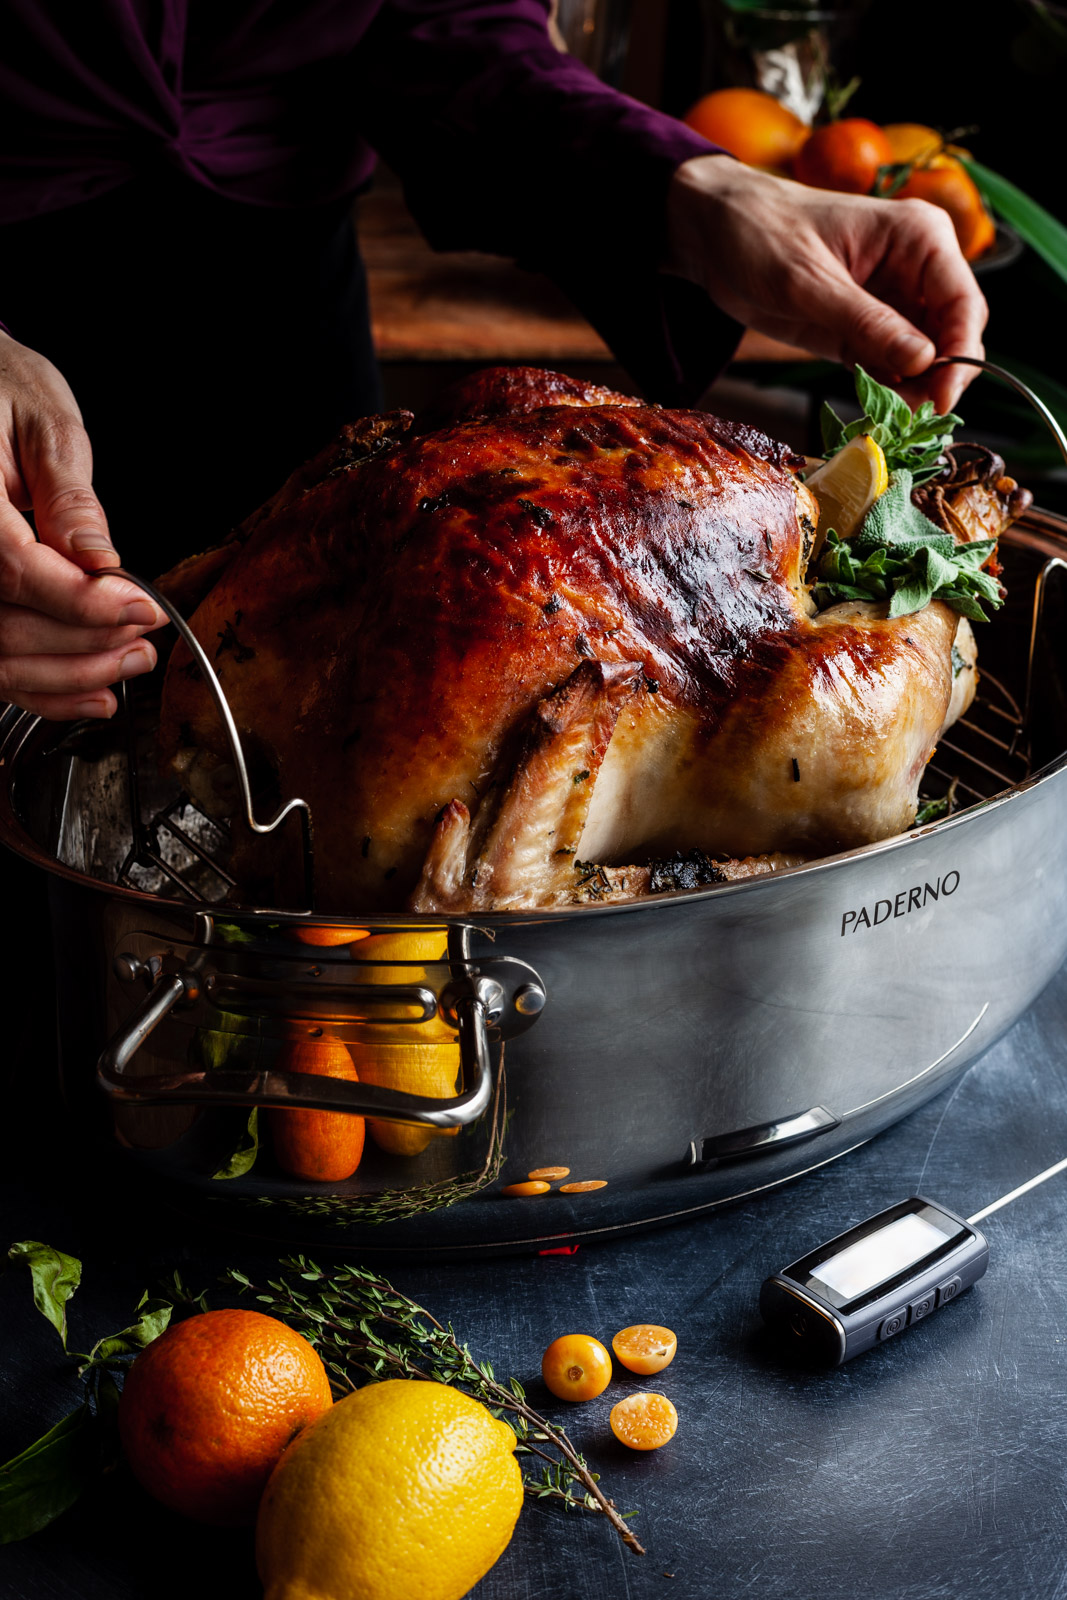 Removing a roasted turkey form the pan